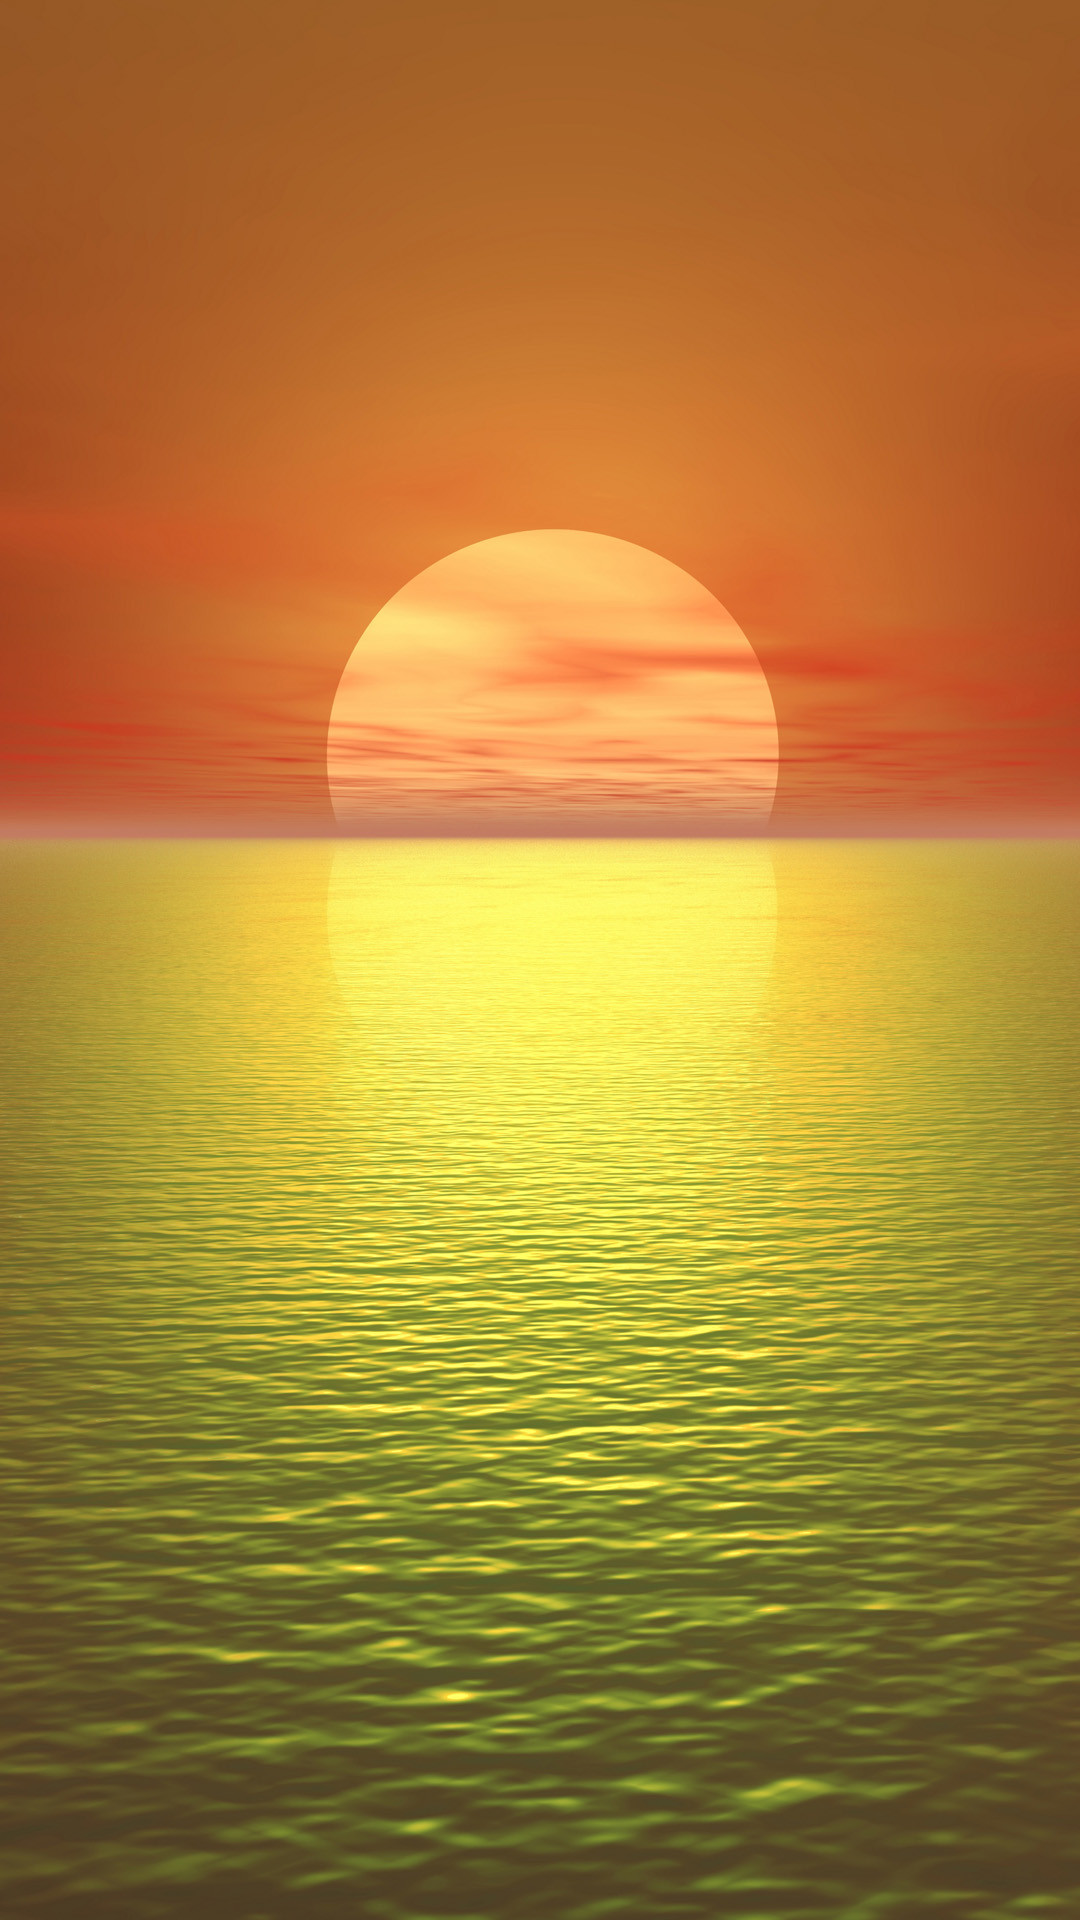 1080x1920 The most tranquil sunset iPhone 6 wallpaper Â· Iphone 6 WallpaperCool  WallpaperPhone ...